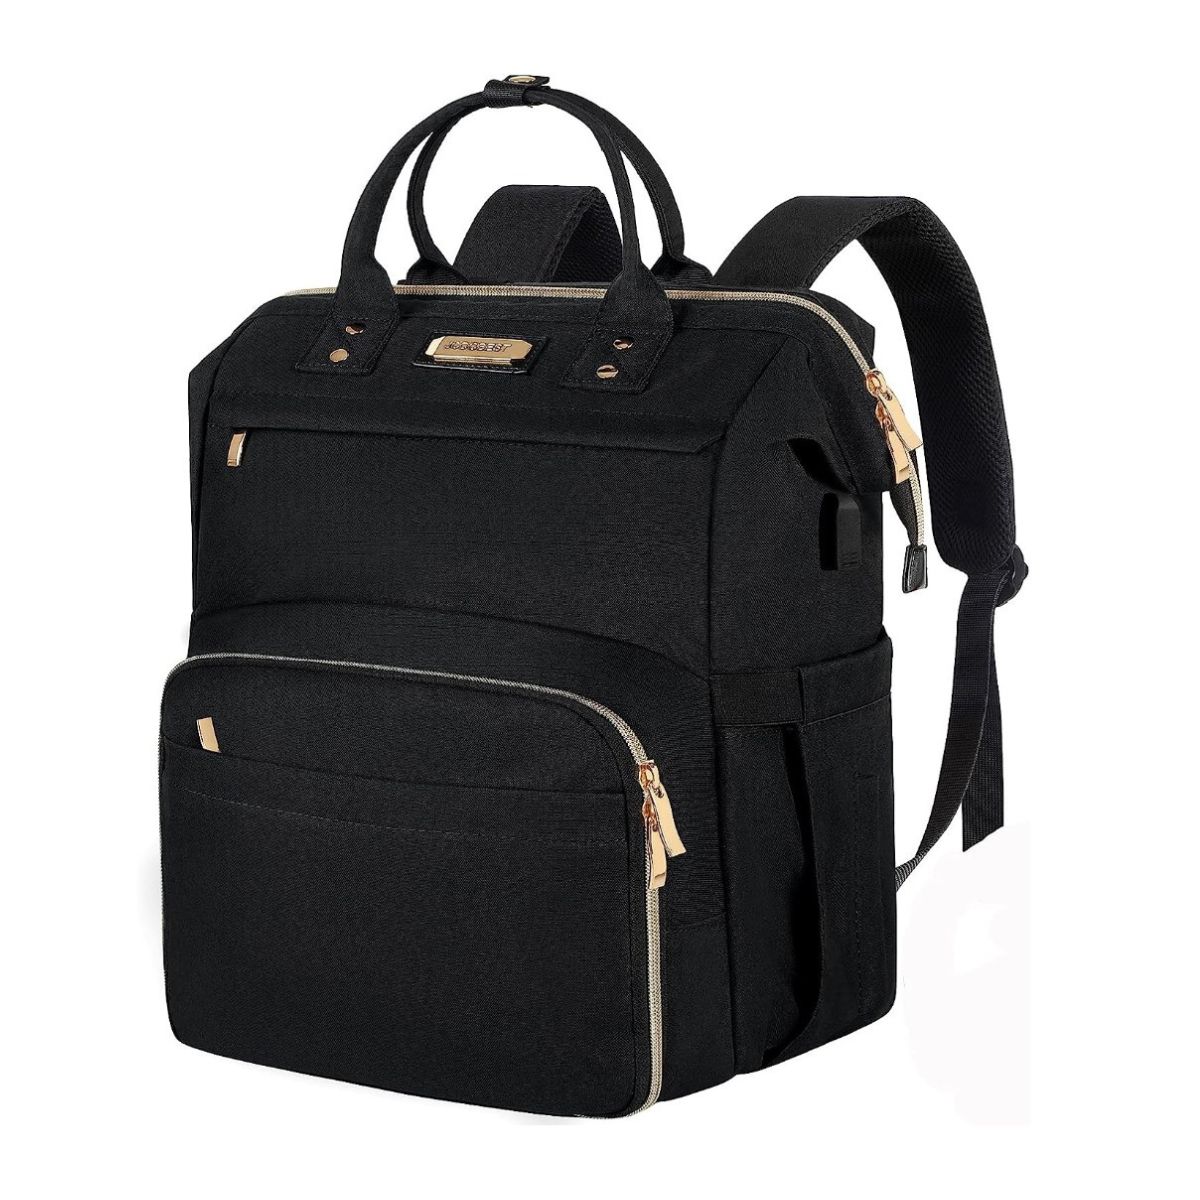 Black backpack lunch box with gold zippers